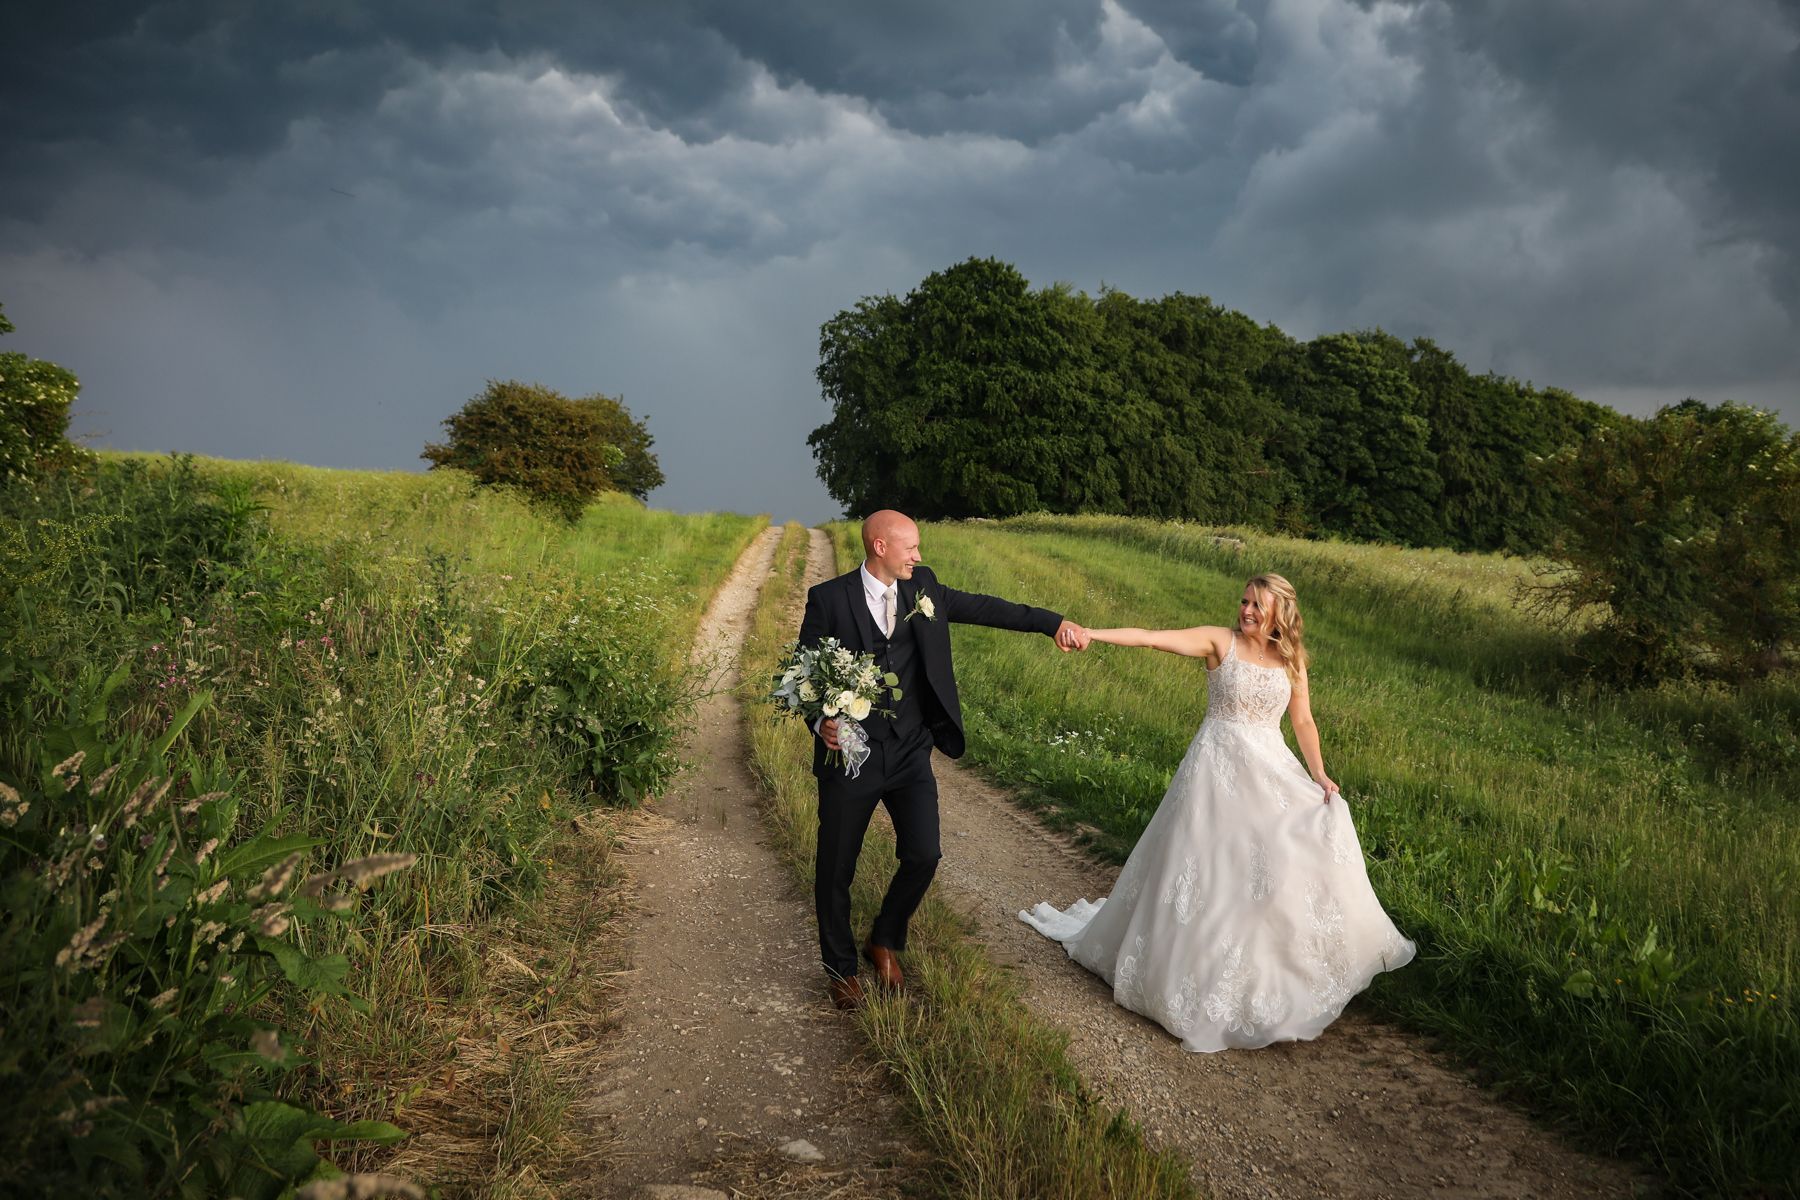 Charlotte and James were married at Stone Barn in June